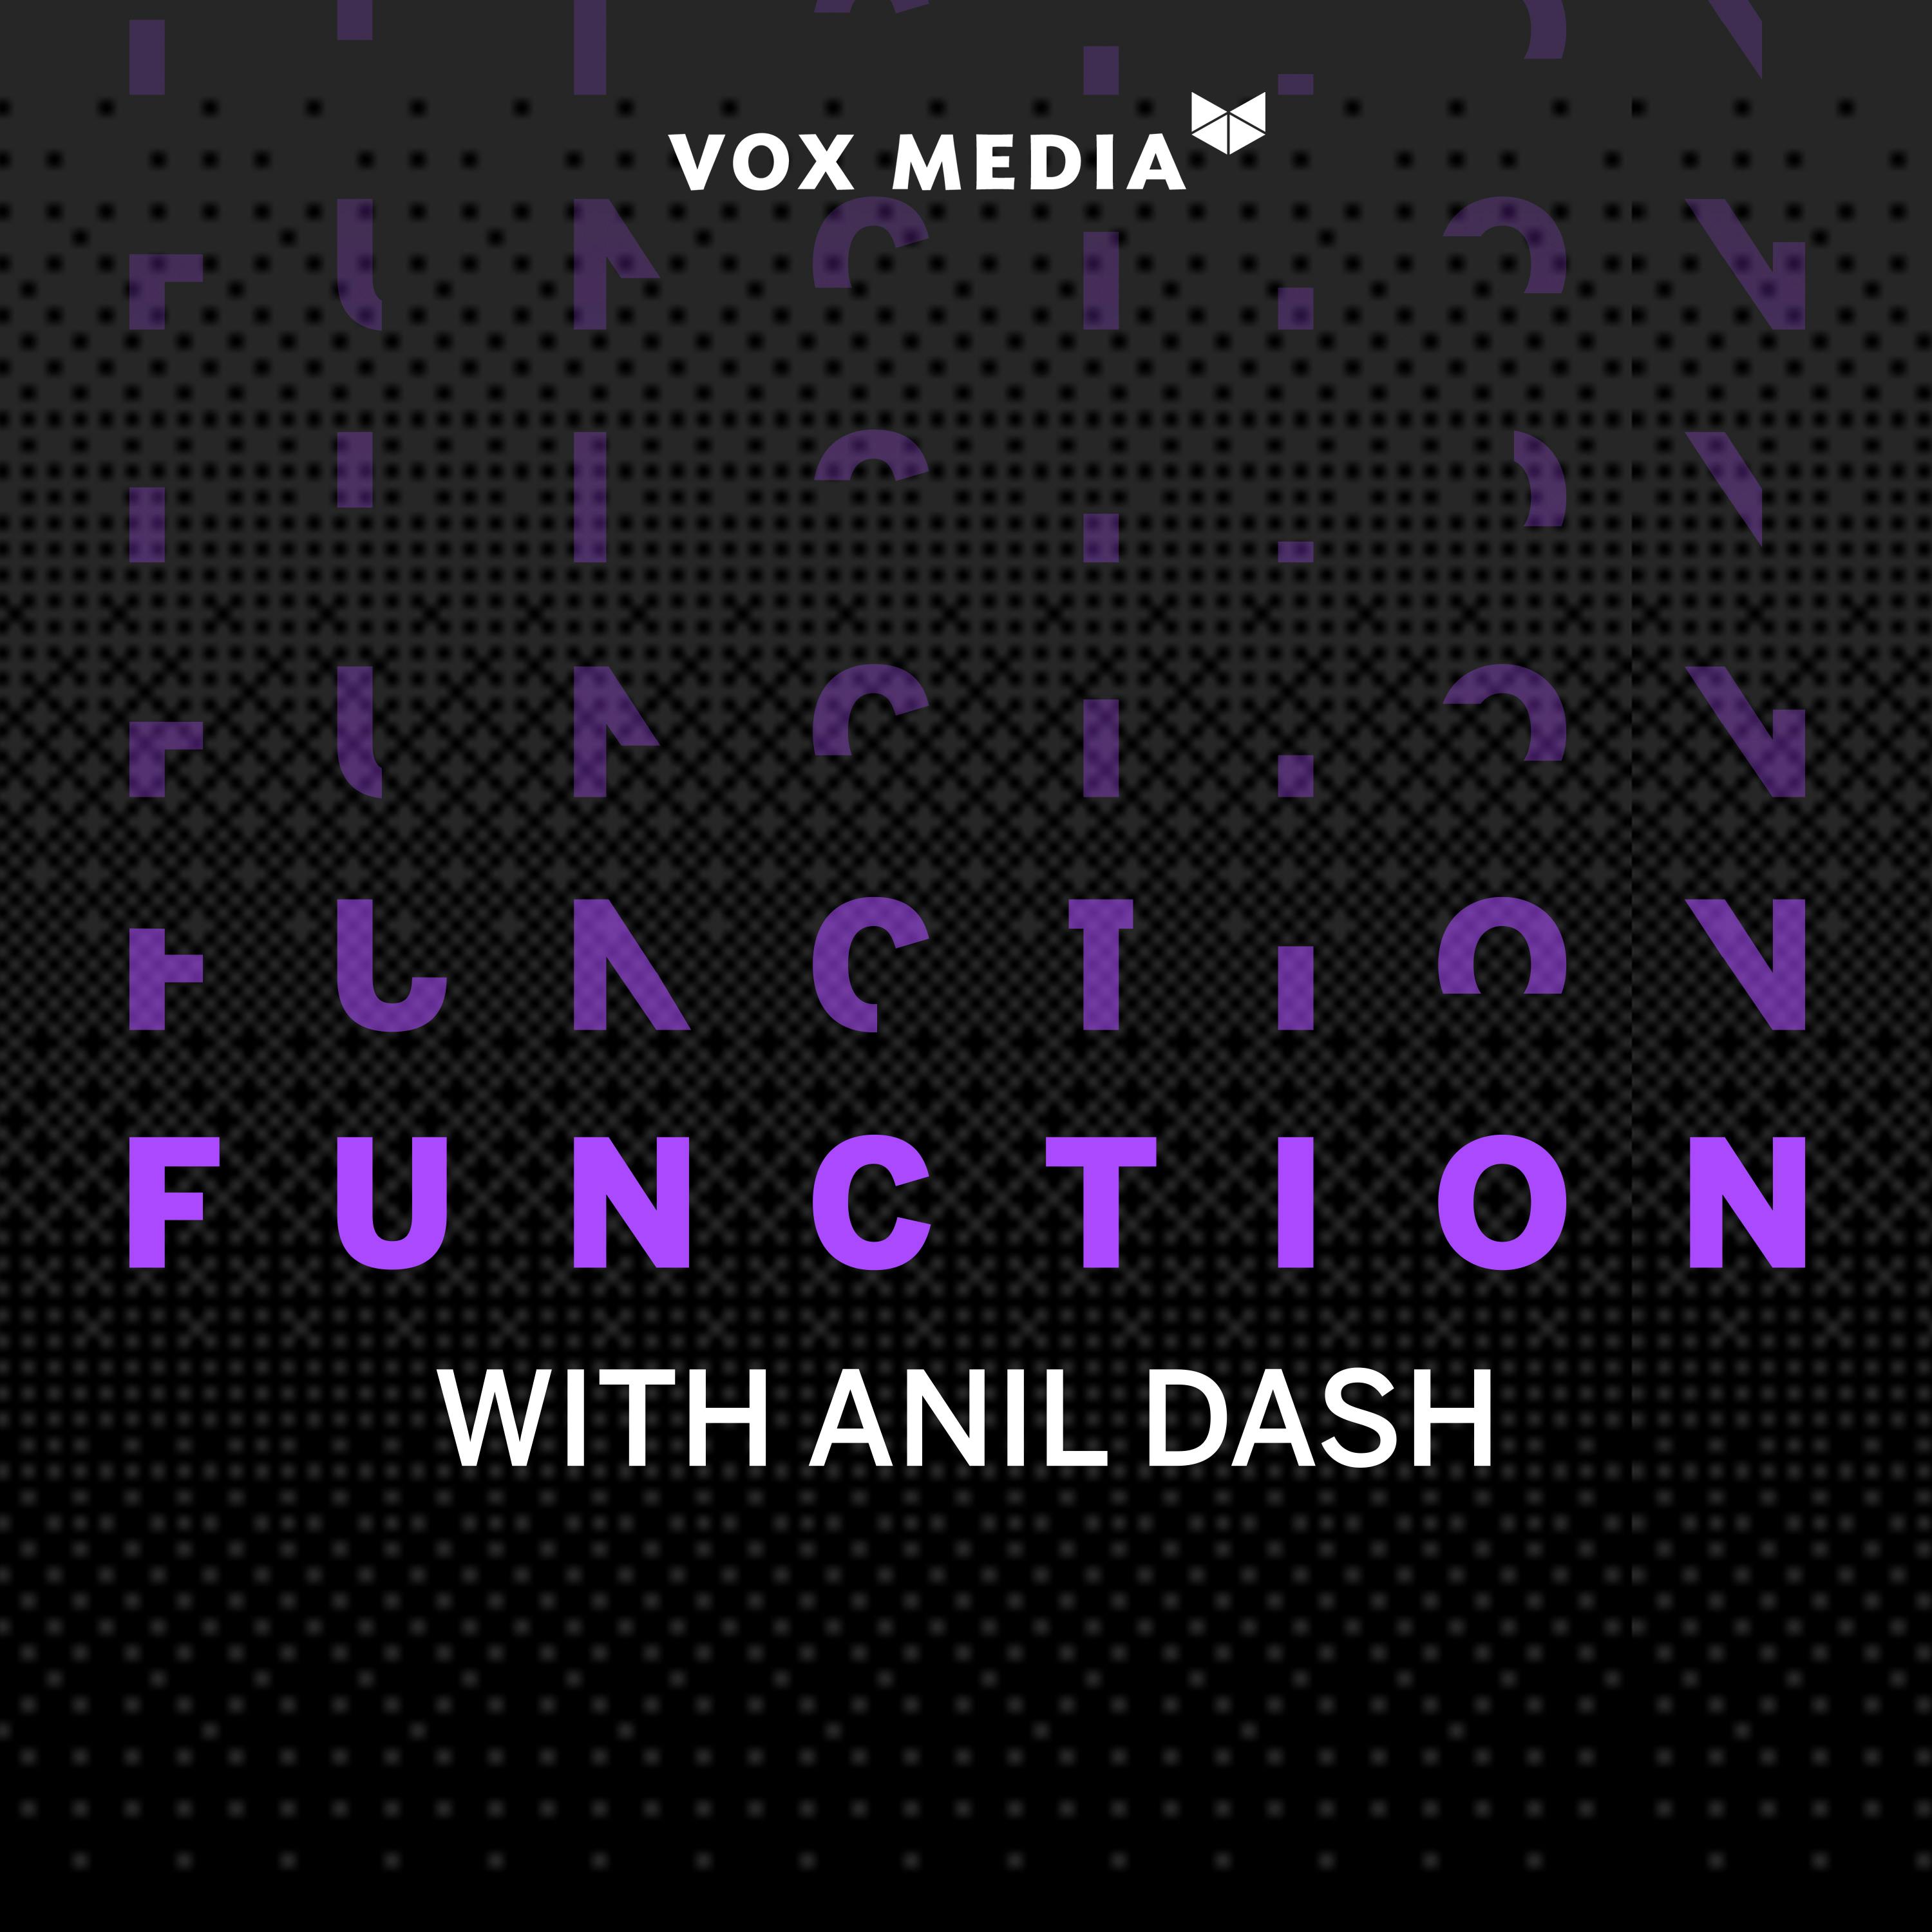 Function with Anil Dash